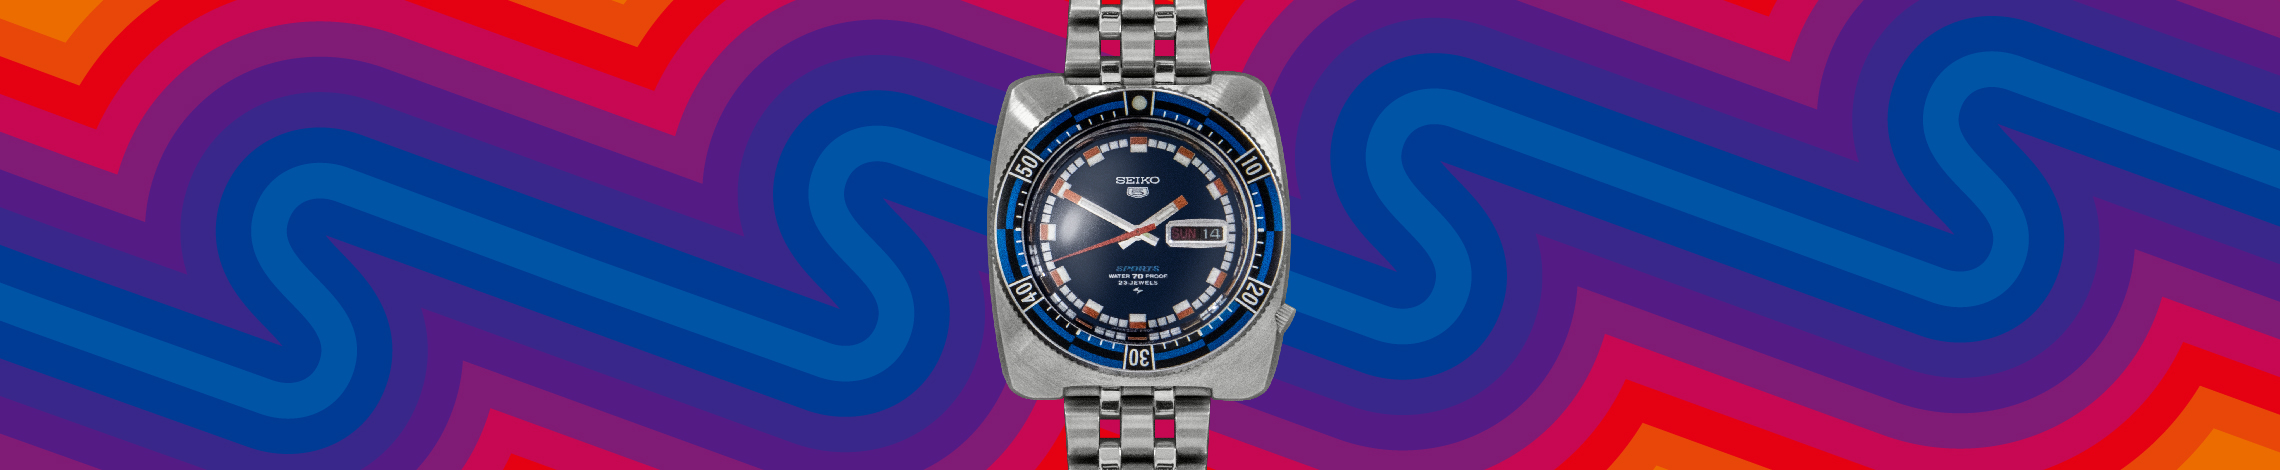 Vol.29 As the times change, designs change too. The past, present, and future of Seiko 5 Sports.